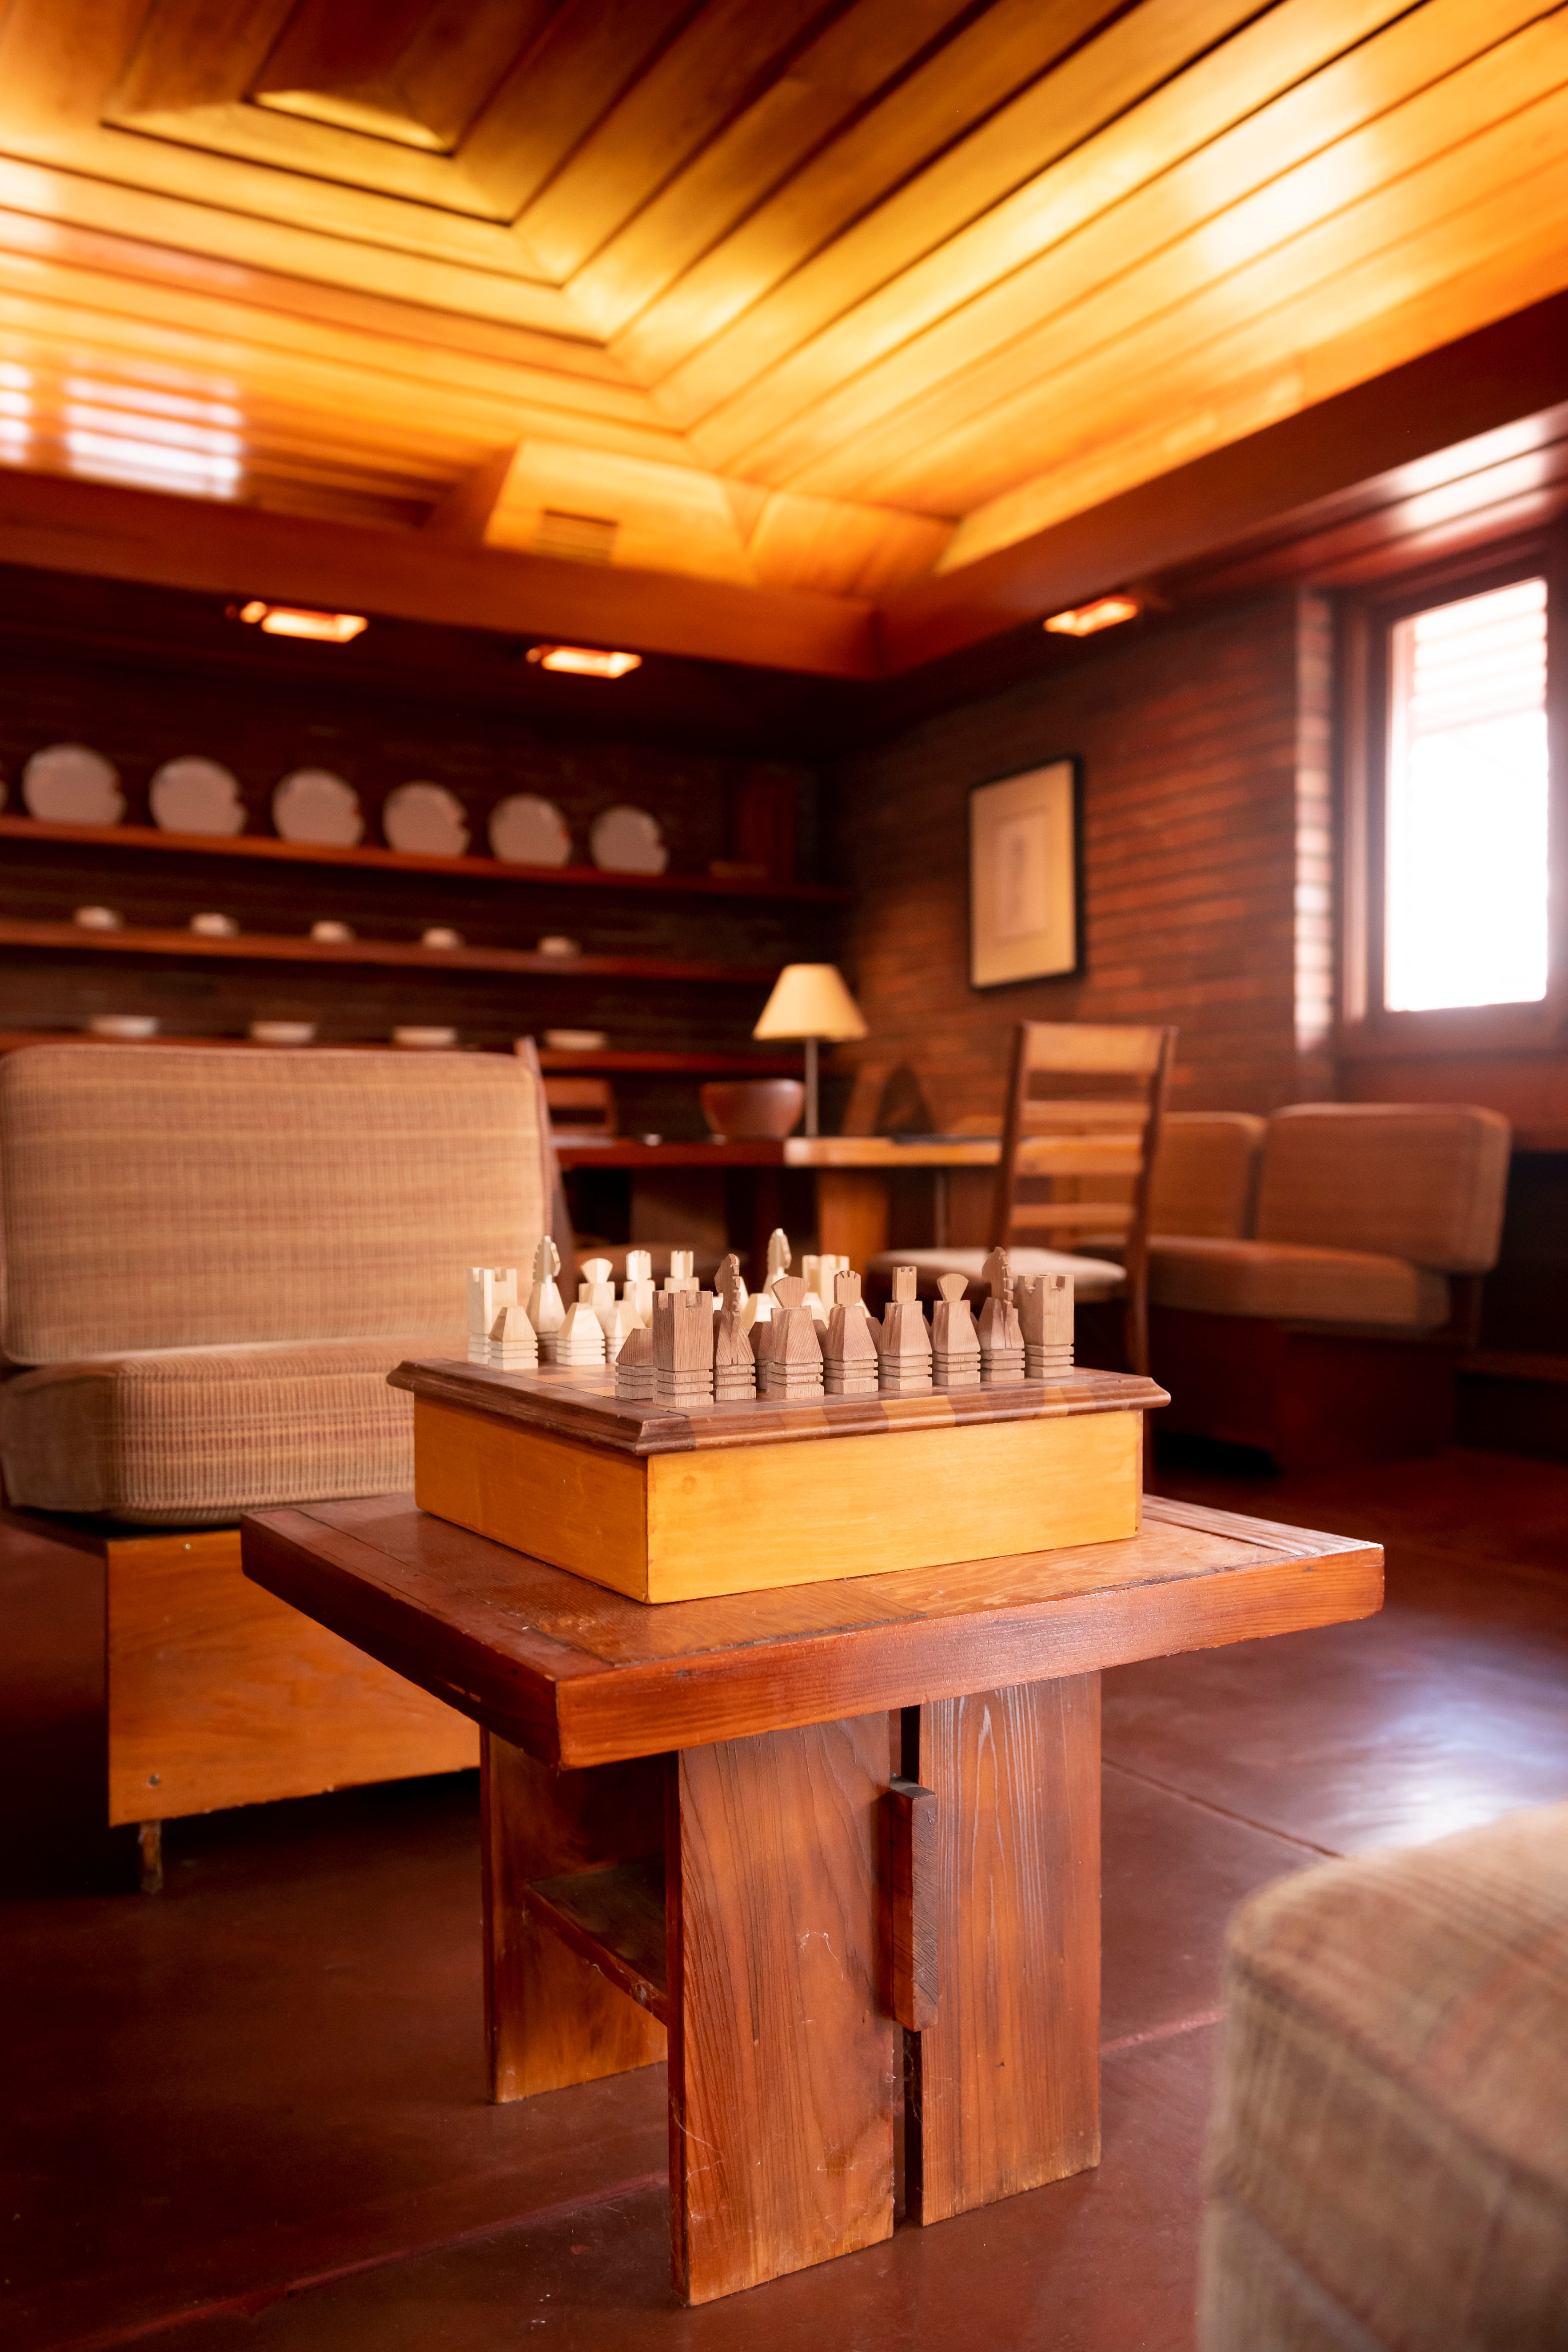 A chess set sits in the main living area.